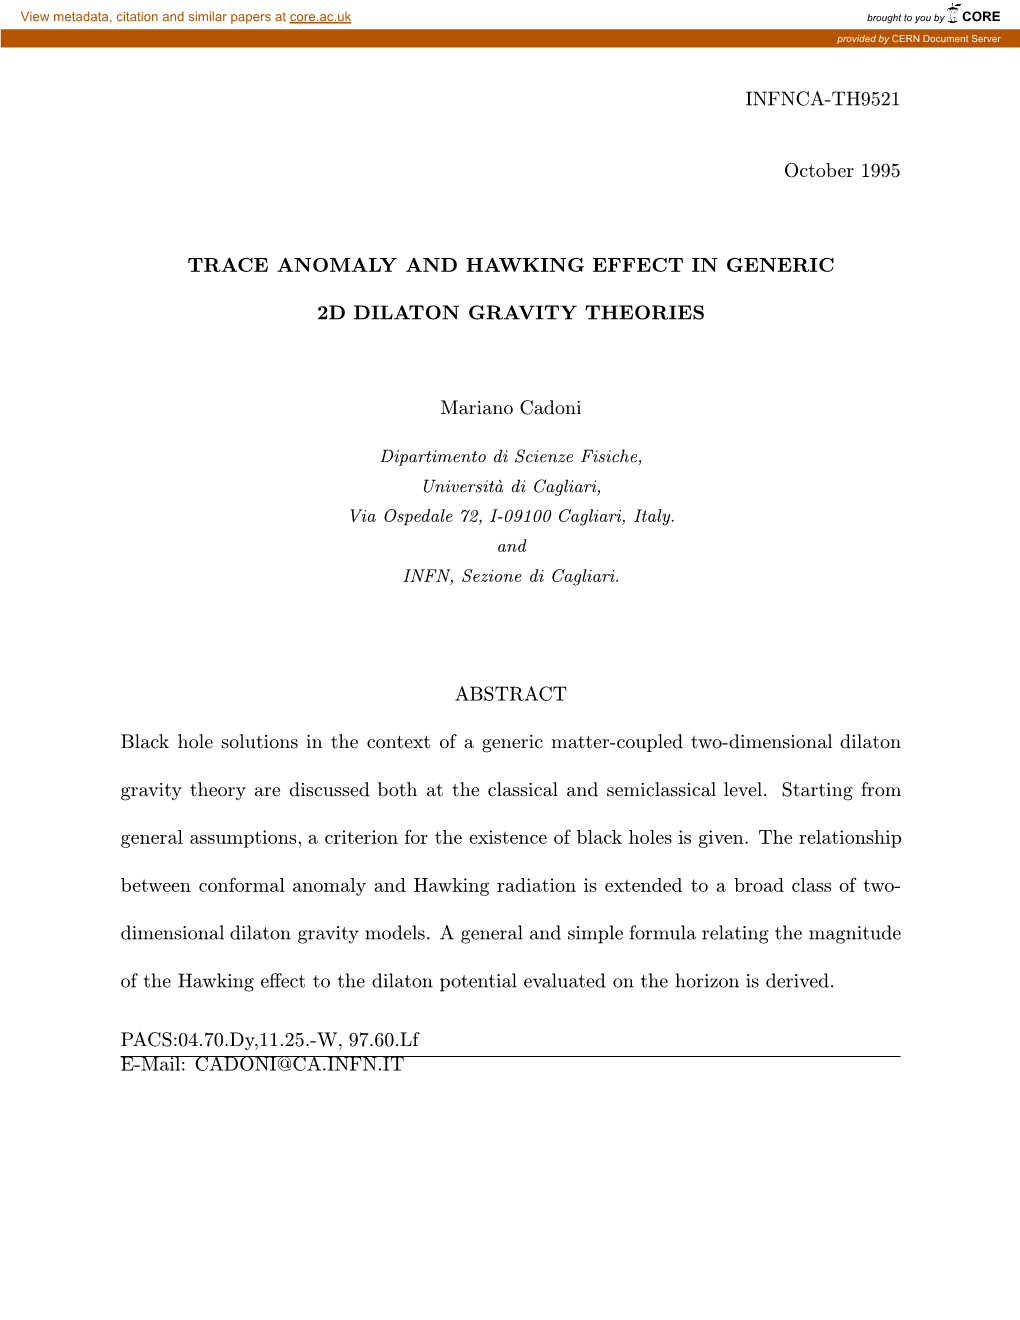 Trace Anomaly and Hawking Effect in Generic 2D Dilaton Gravity Theories